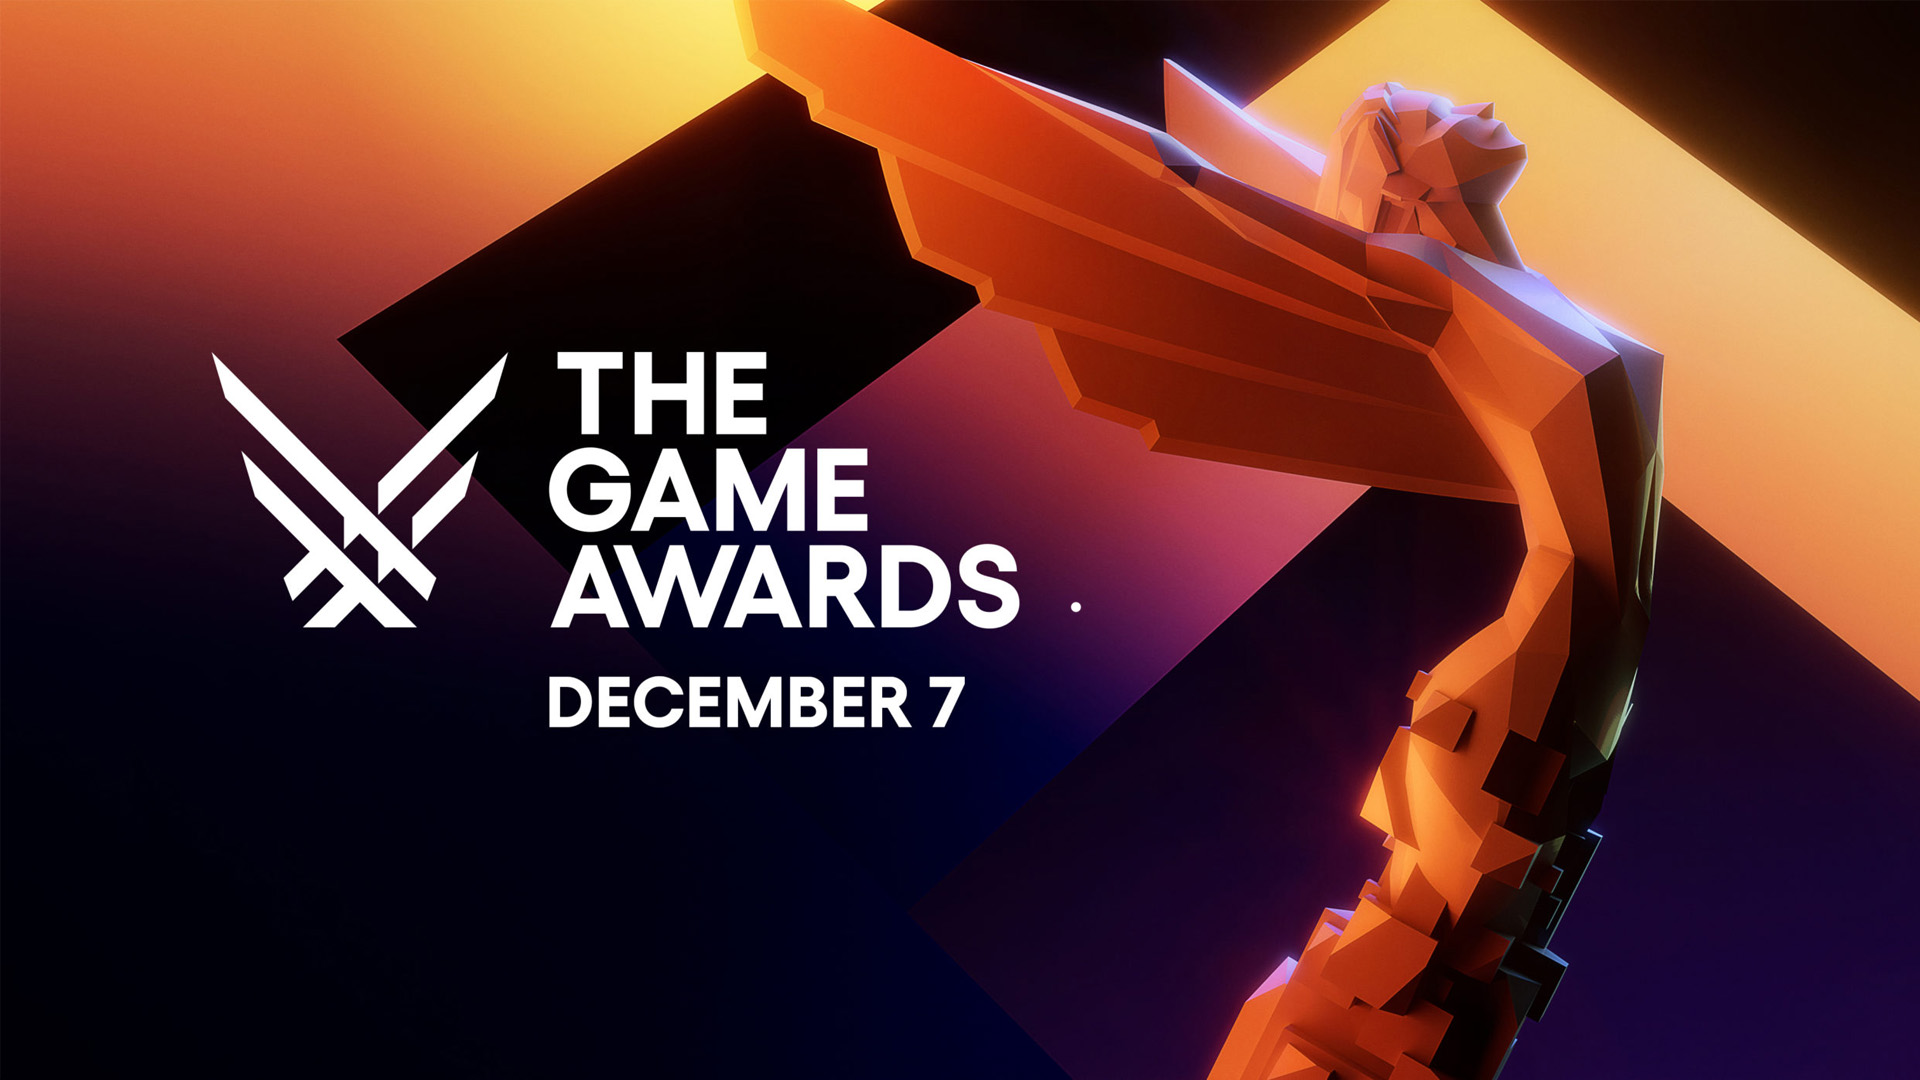 All Game of the Year (GOTY) winners in the history of The Game Awards